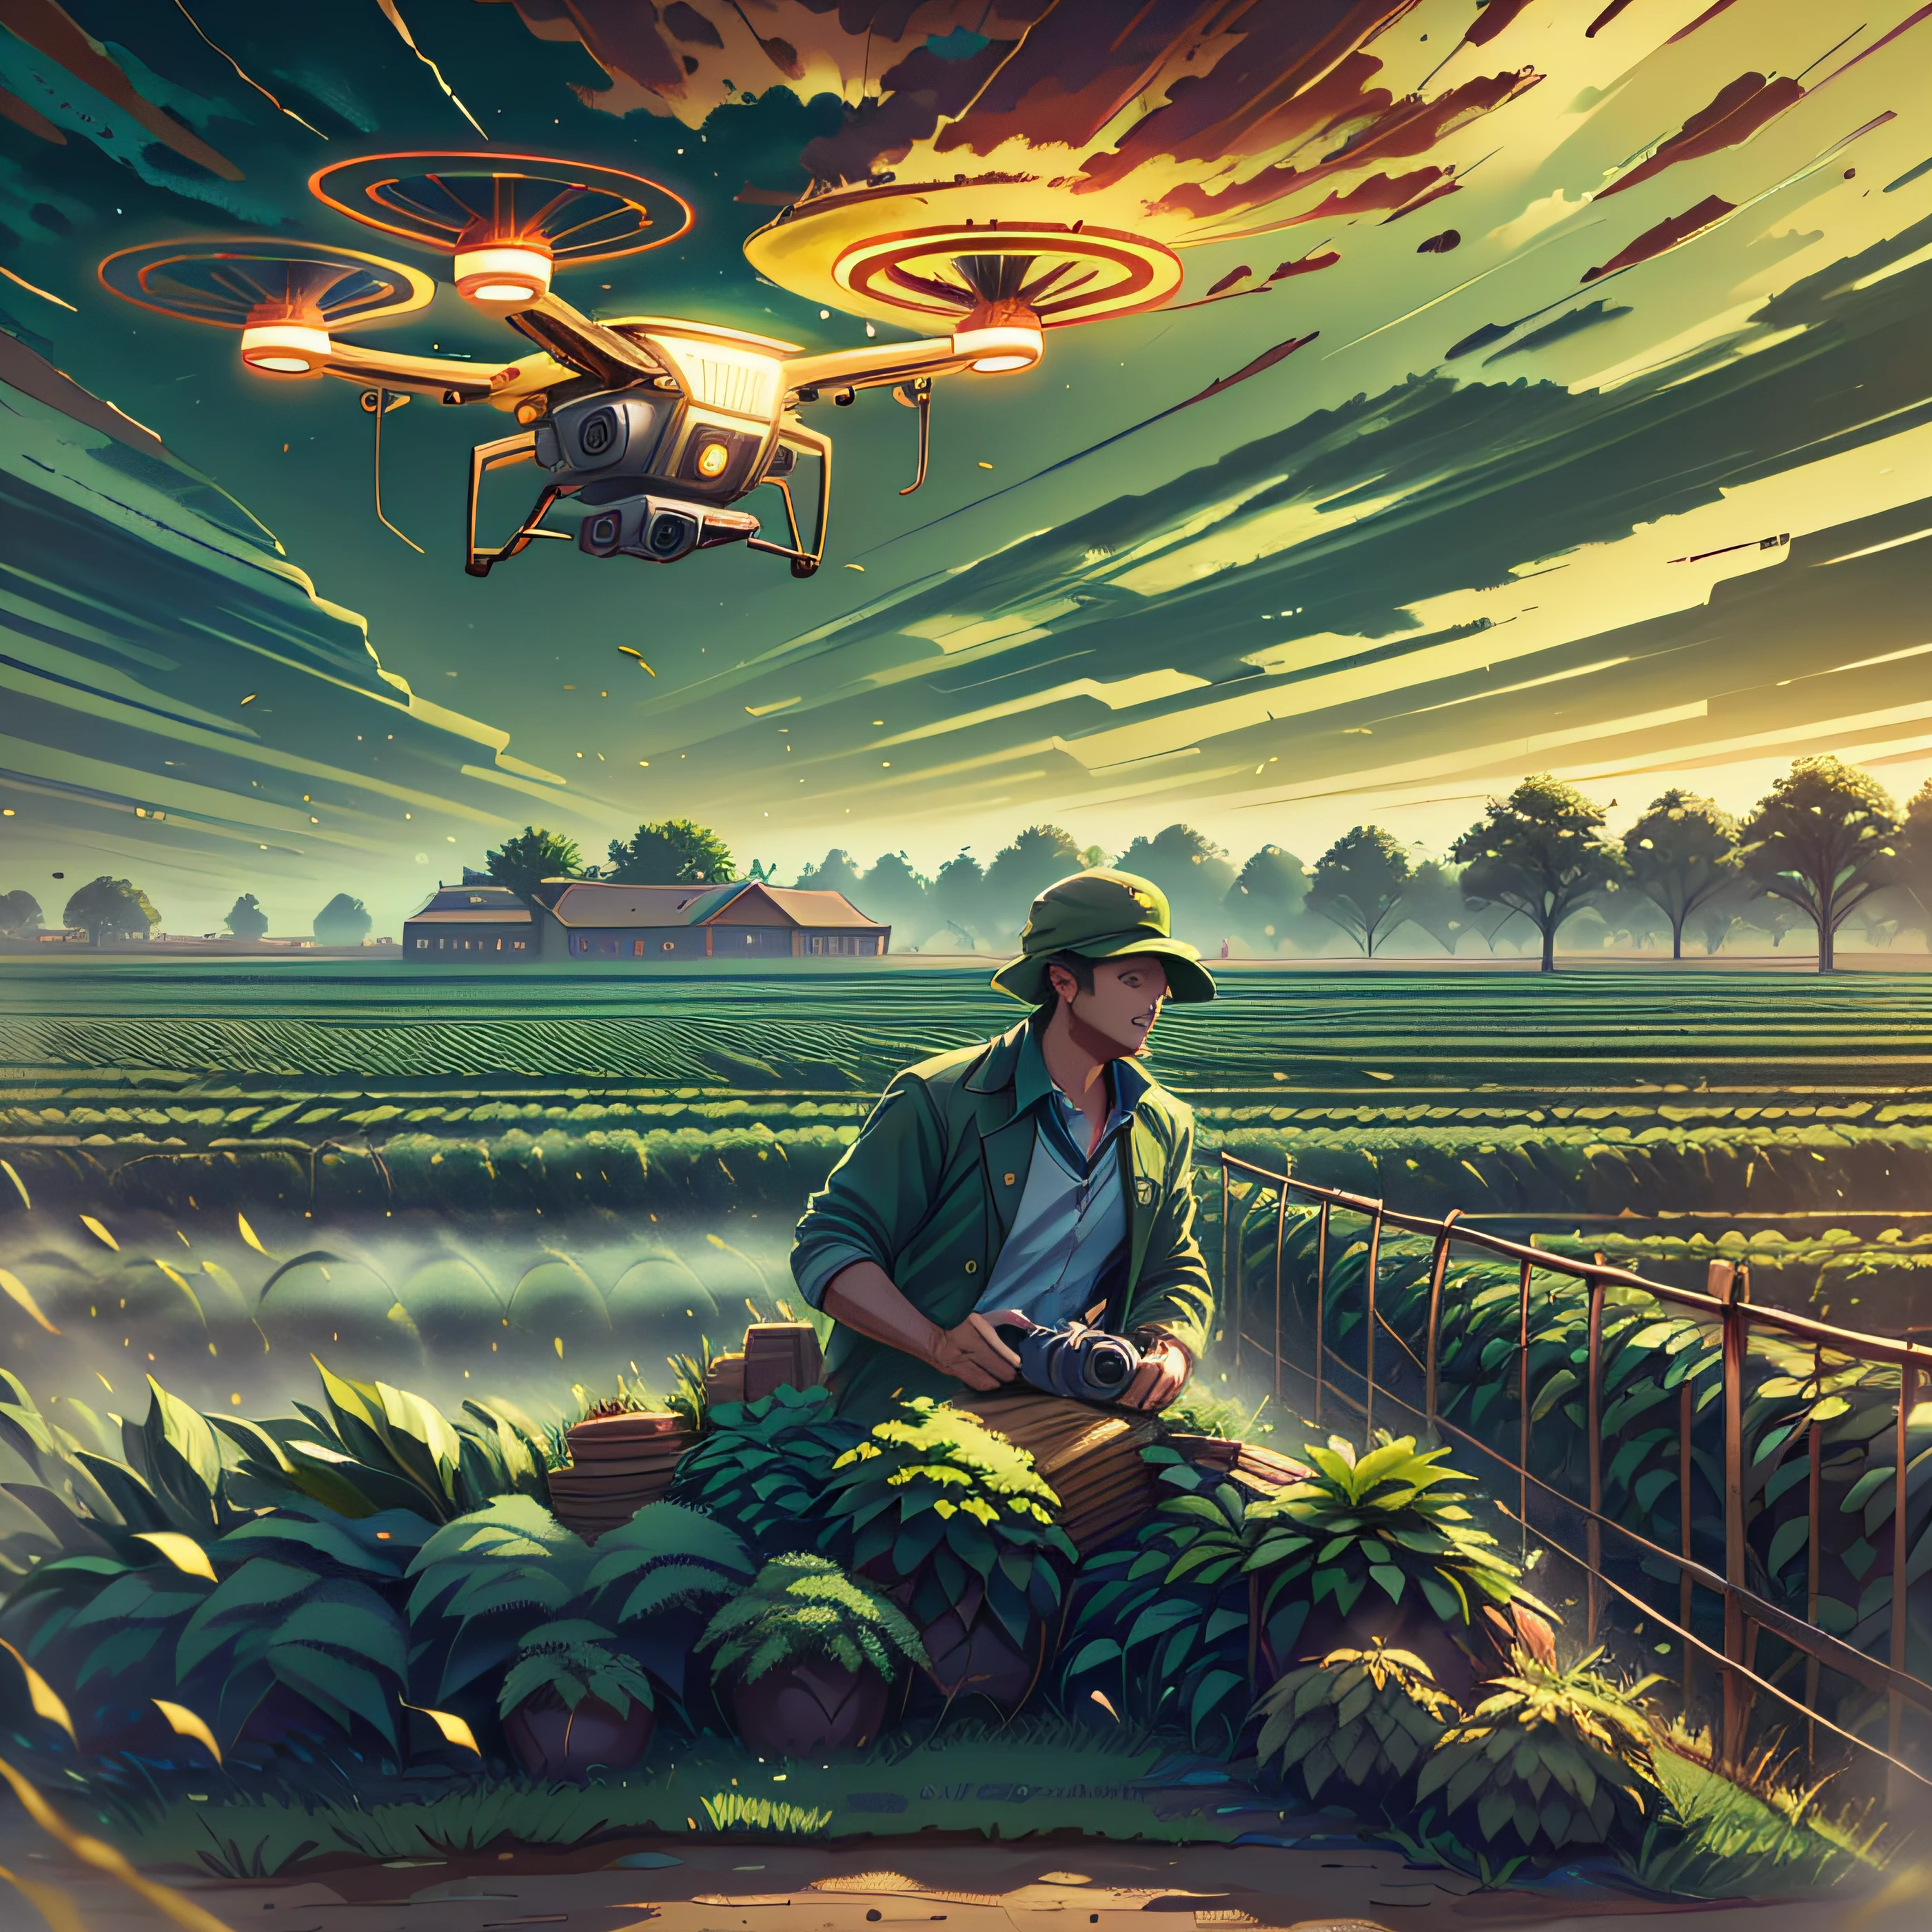 Imagine a scene of a modern farm in full activity, illuminated by the setting sun. In the center of the image, a rugged, experienced farmer, dressed in work clothes, looks up, watching a high-tech drone hovering in the sky. The drone, shining in the sunlight, is equipped with cameras and sensors, representing the fusion of agriculture and technology. The surrounding farm is green and fertile, with rows of plantations stretching to the horizon. Use a high-resolution DSLR camera, such as the Canon EOS 5D Mark IV, with a 50mm lens to capture this scene in vivid detail. The lighting should be natural, with the setting sun providing a golden glow to the scene. The colors should be rich and saturated, with vibrant greens of the plantations and the sky clear blue. The composition should be balanced, with the farmer and the drone in the center, and the vast farm stretching around them. --Air 16:9 --V 5.1 --Style Raw --Q 2 --s 750